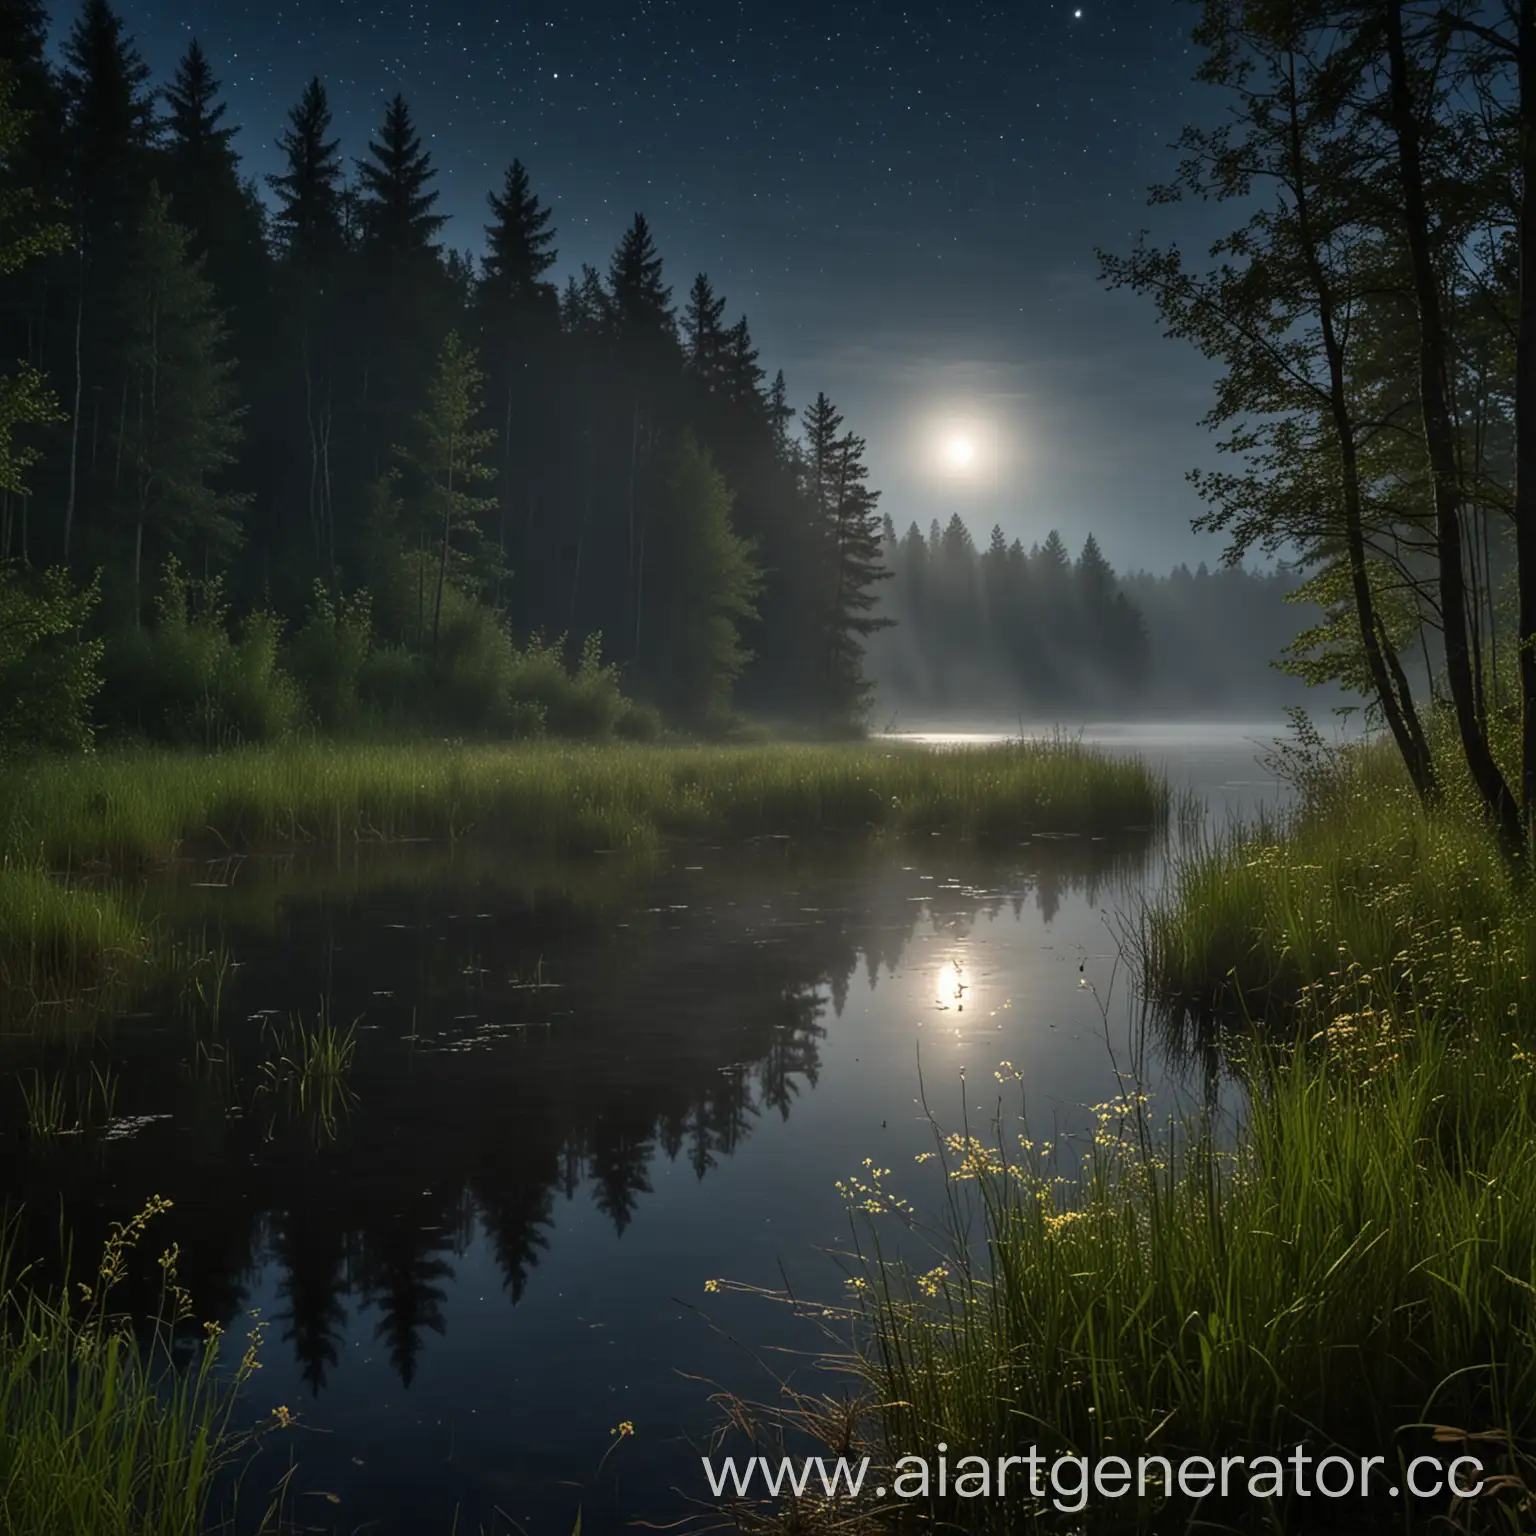 Moonlit-Forest-Lake-with-Fireflies-Dancing-in-Mist